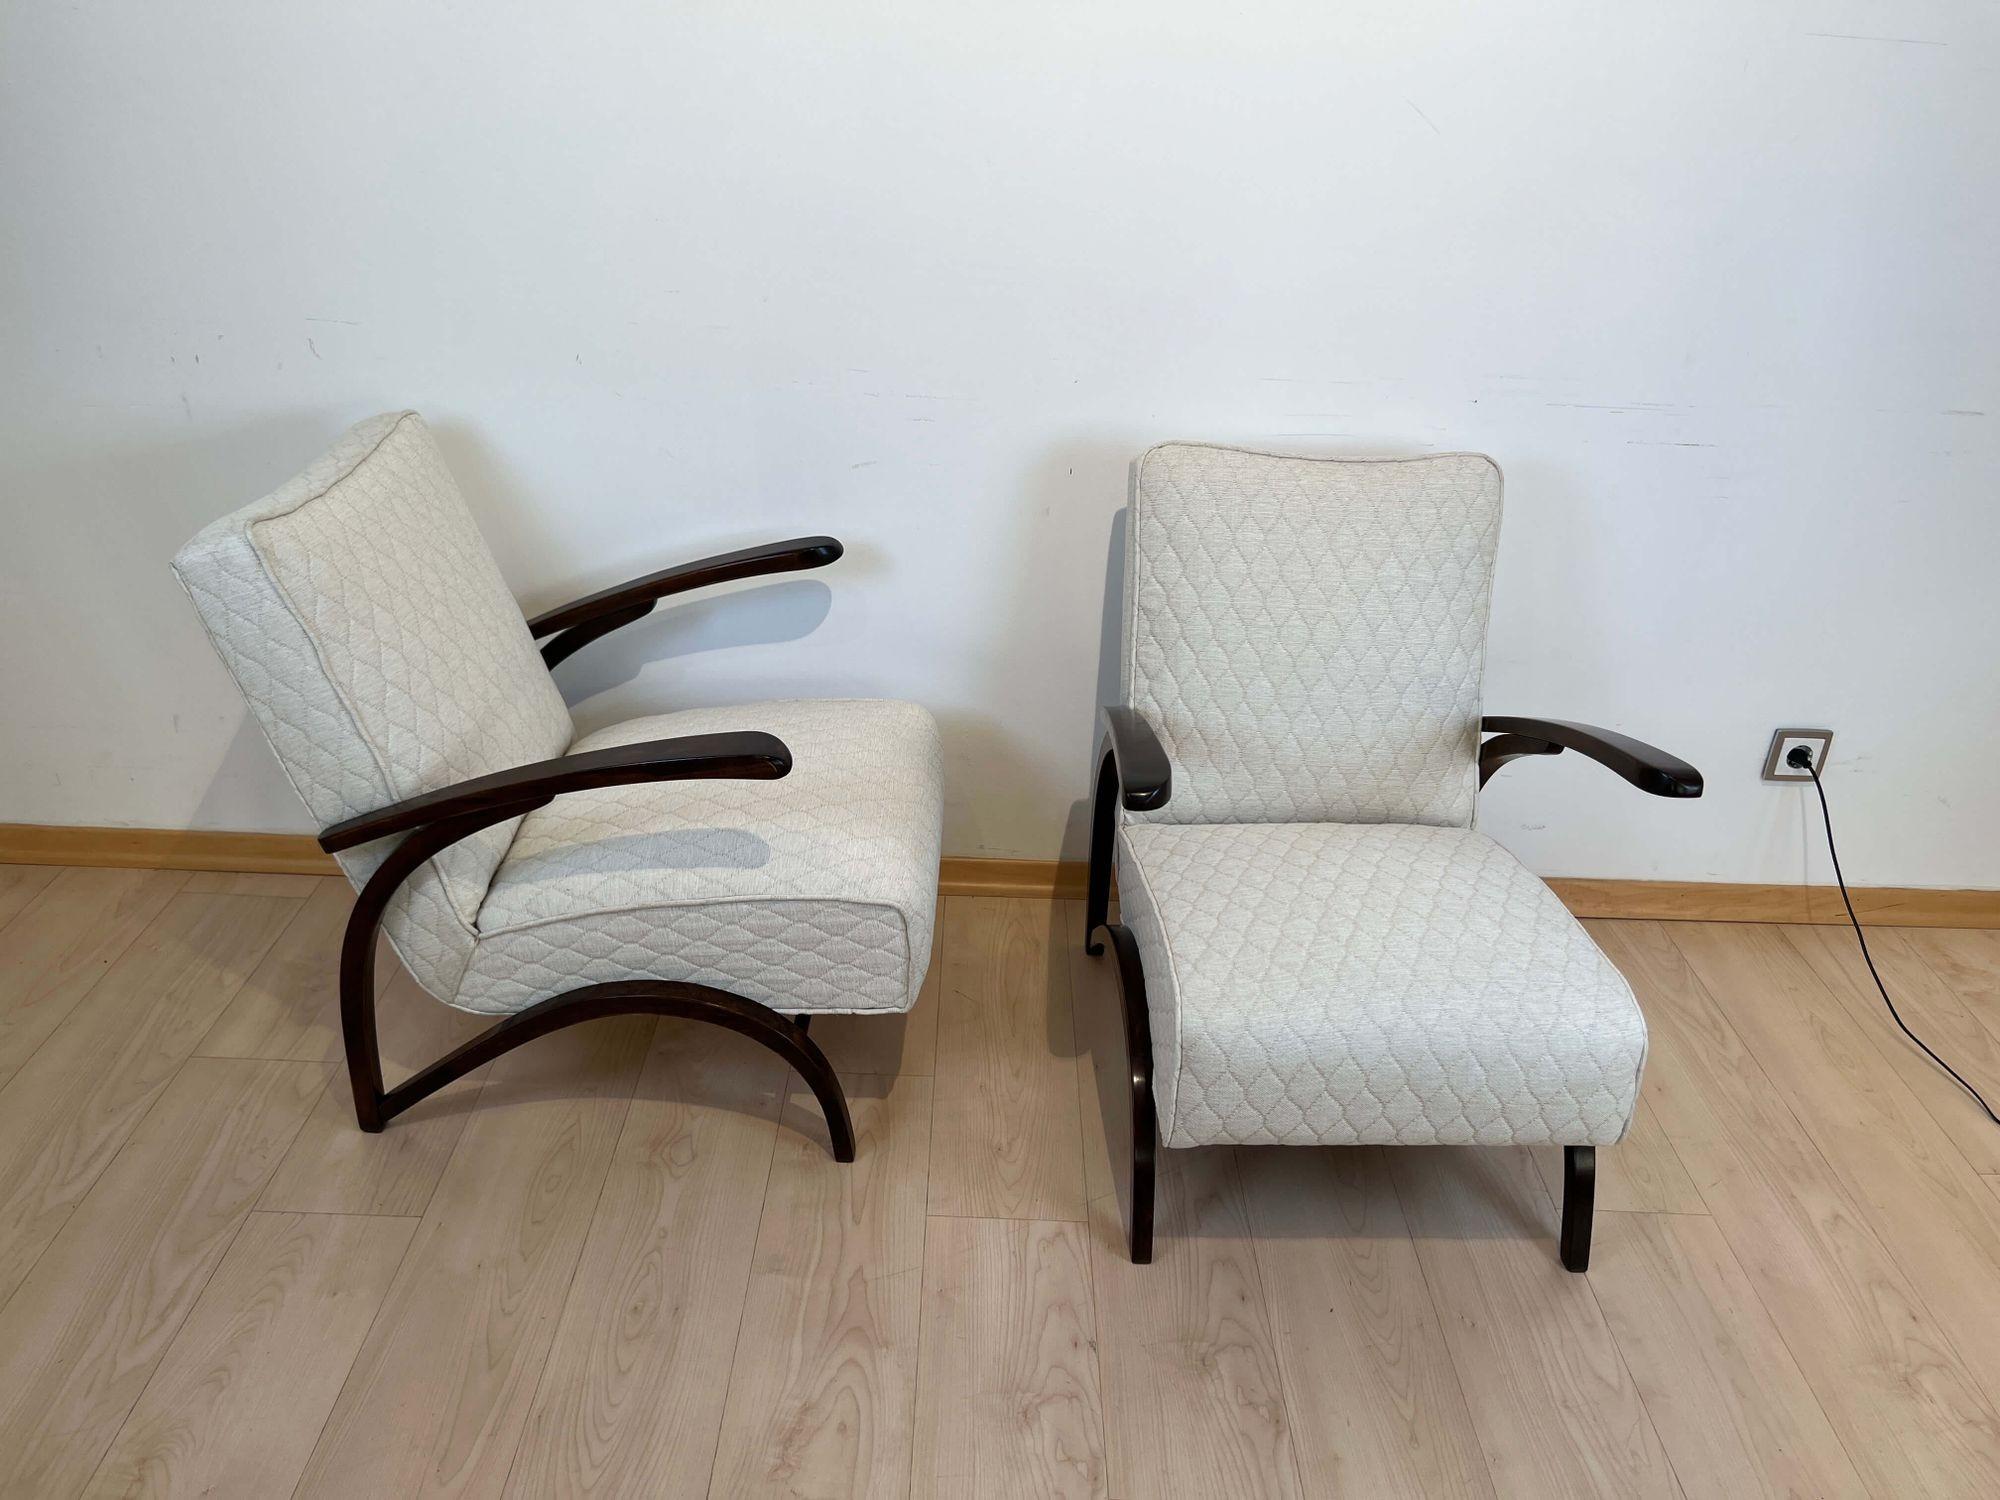 Pair of Art Deco Lounge Chairs by J. Halabala, Czech Republic circa 1930 In Good Condition For Sale In Regensburg, DE